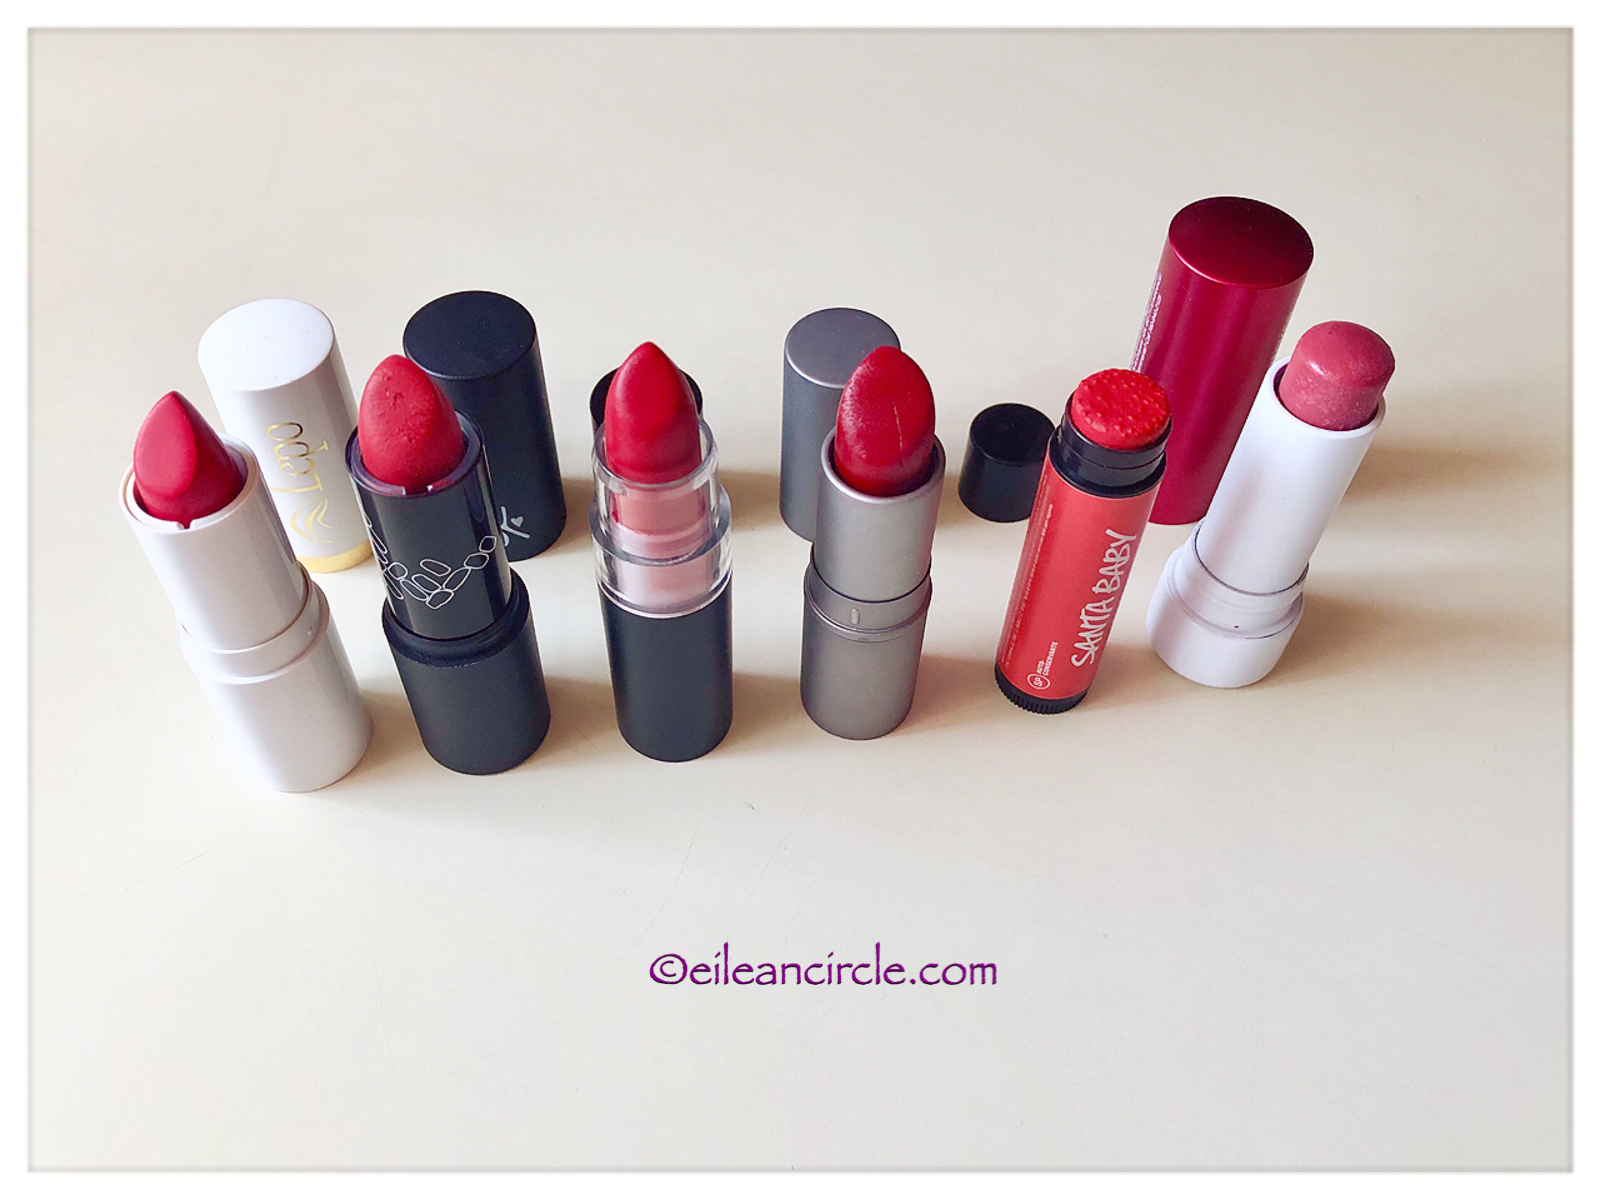 Red Lipstick, Lipstick Collection, Cosmética Natural